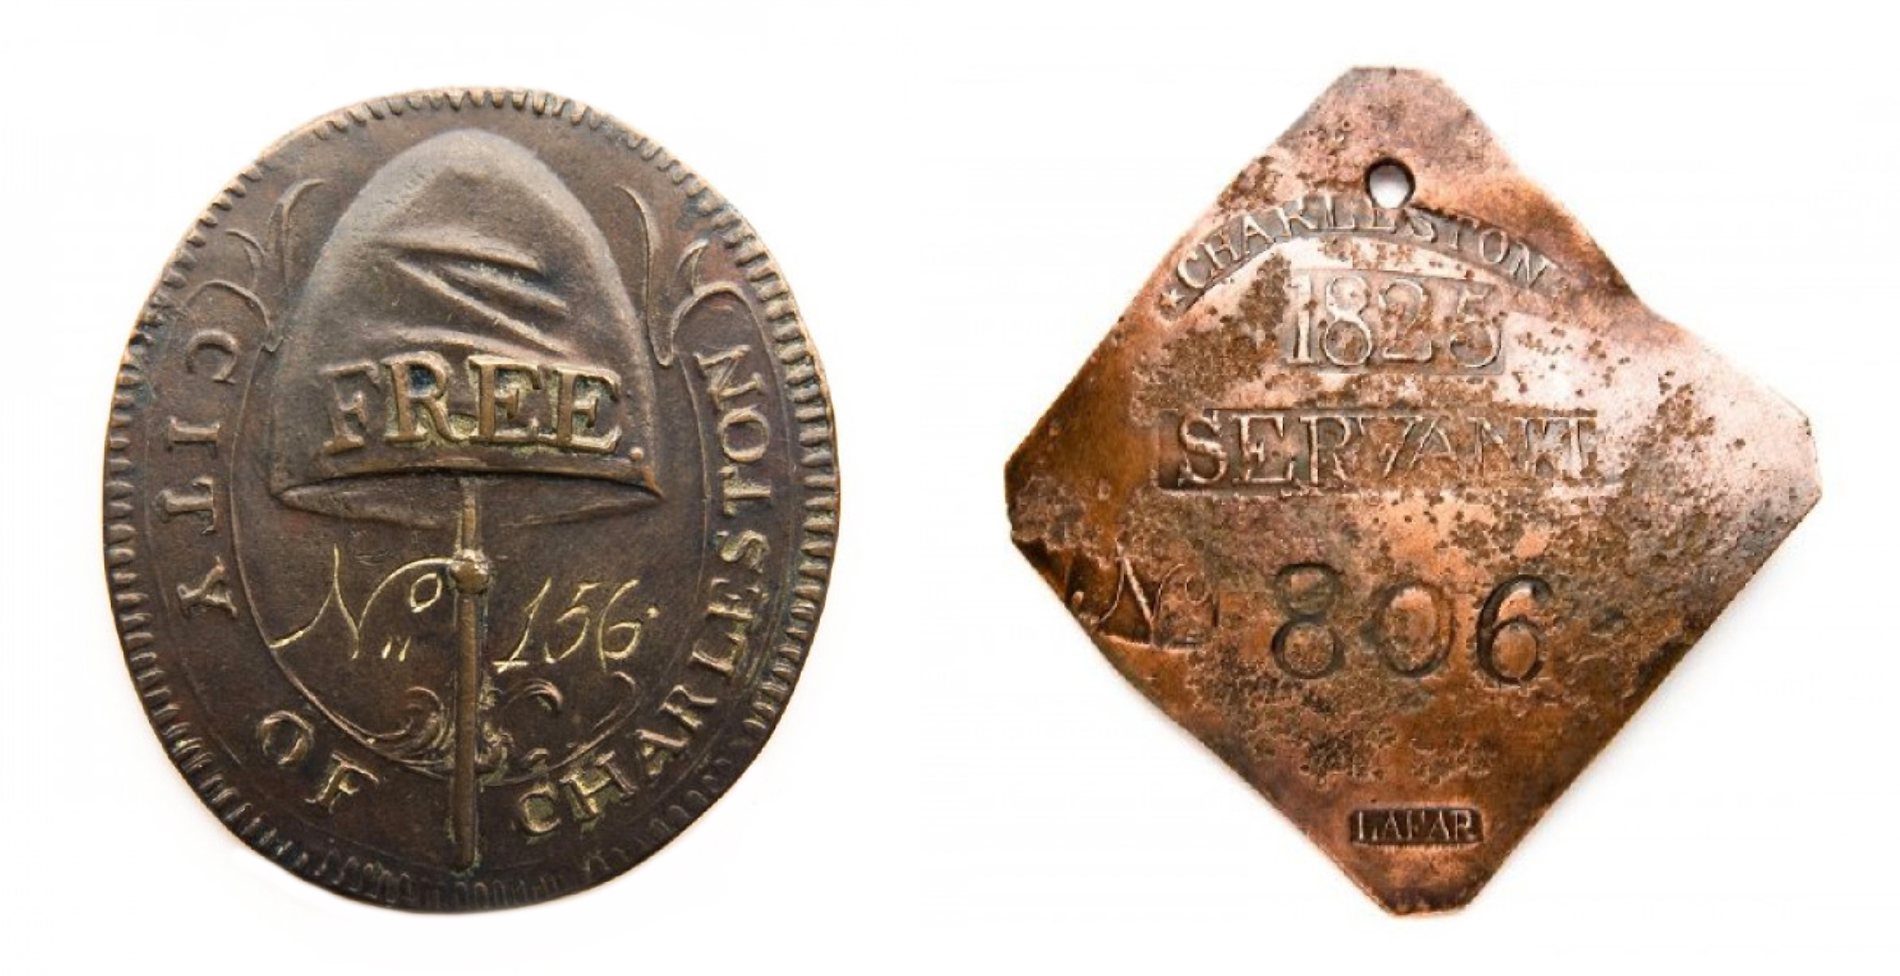 Badges worn by people of African descent in Charleston, South Carolina. The badge on the left was issued to a free person of color during the 1780s. The badge on the right was issued to an enslaved person (“servant” was a euphemism for slave) in 1824. Left: Free badge, 1783–89, copper, 1.457 x 1.614 inches; right: Slave badge, 1825, copper, 2.717 x 2.559 inches (both, The Charleston Museum)